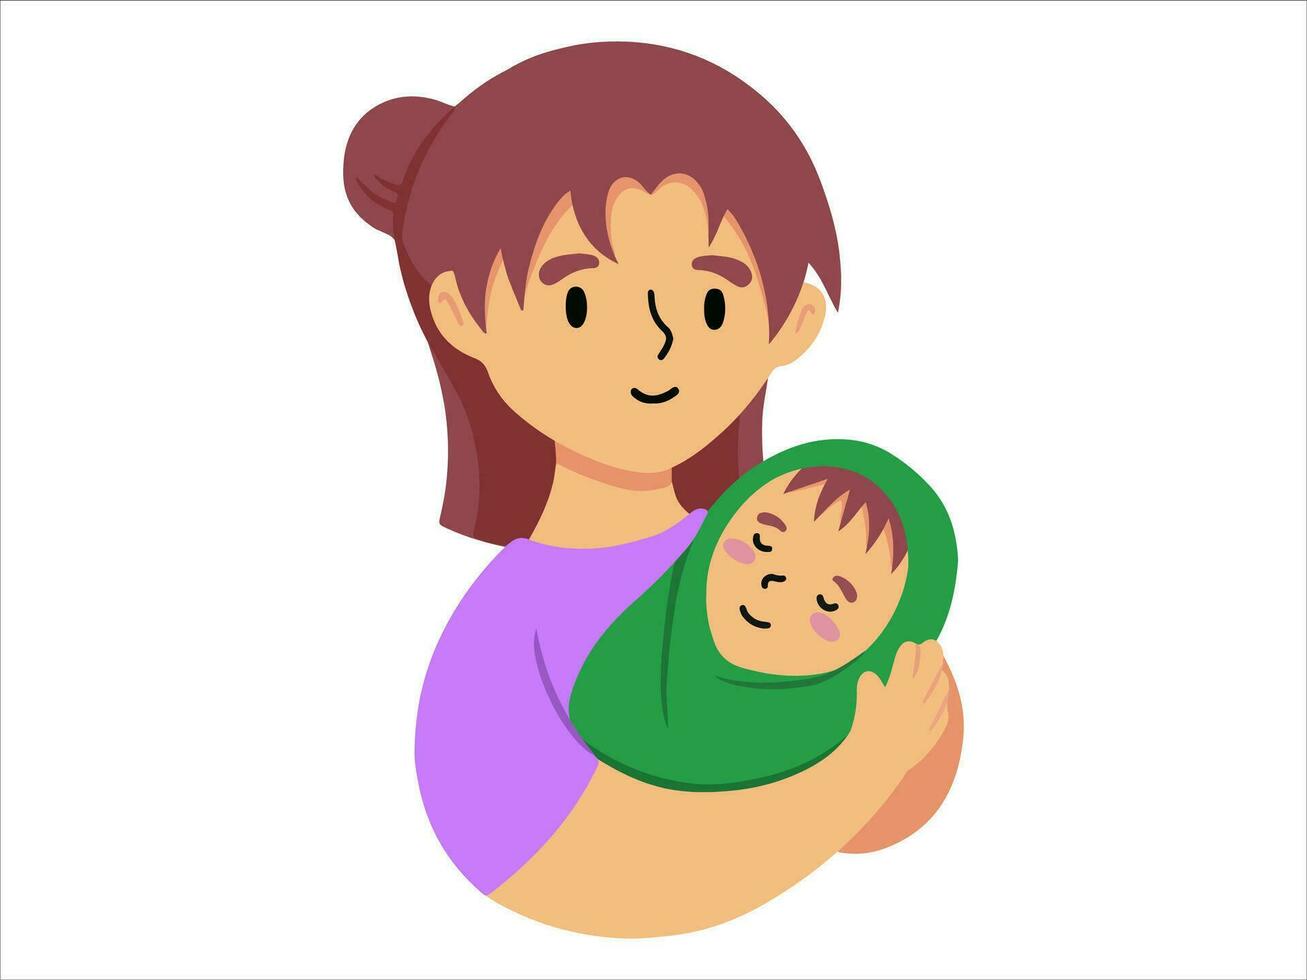 Hand drawn Mother holding baby illustration vector